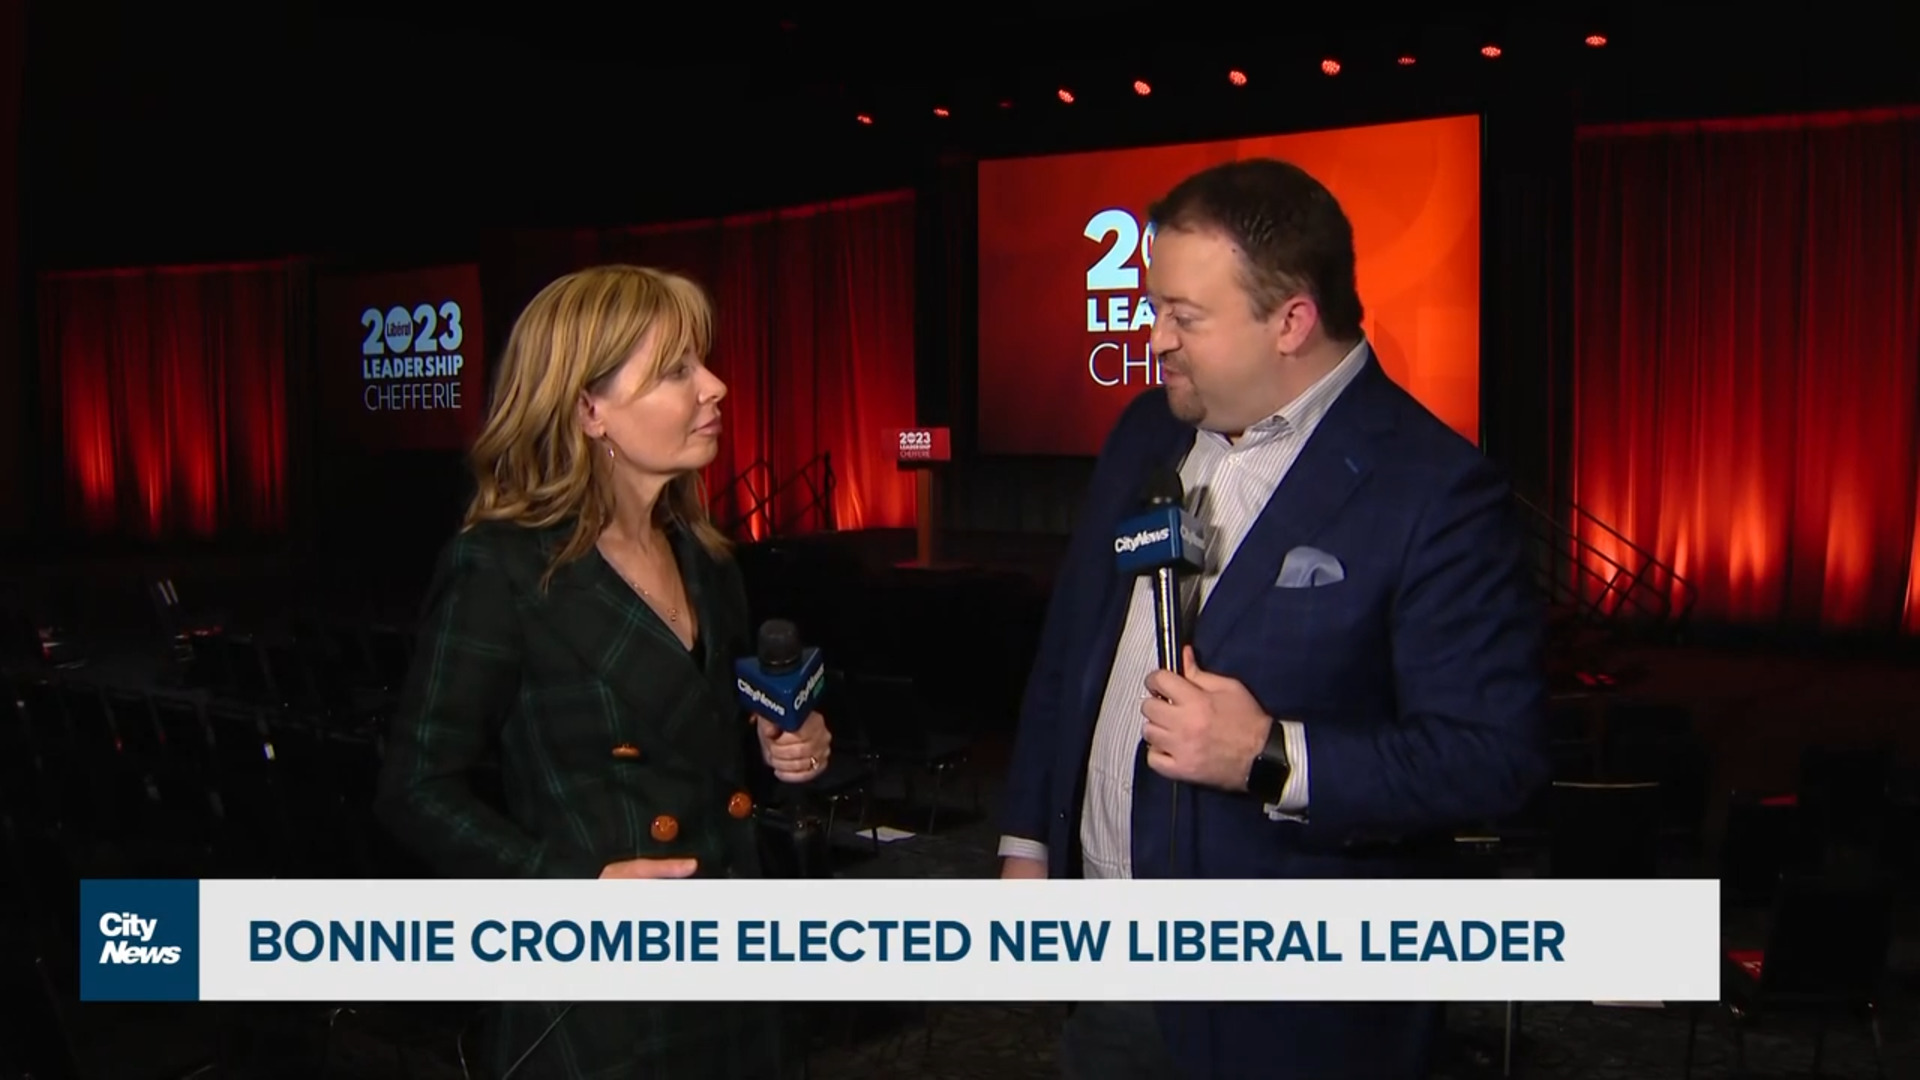 Bonnie Crombie secures close victory in provincial liberal leadership race